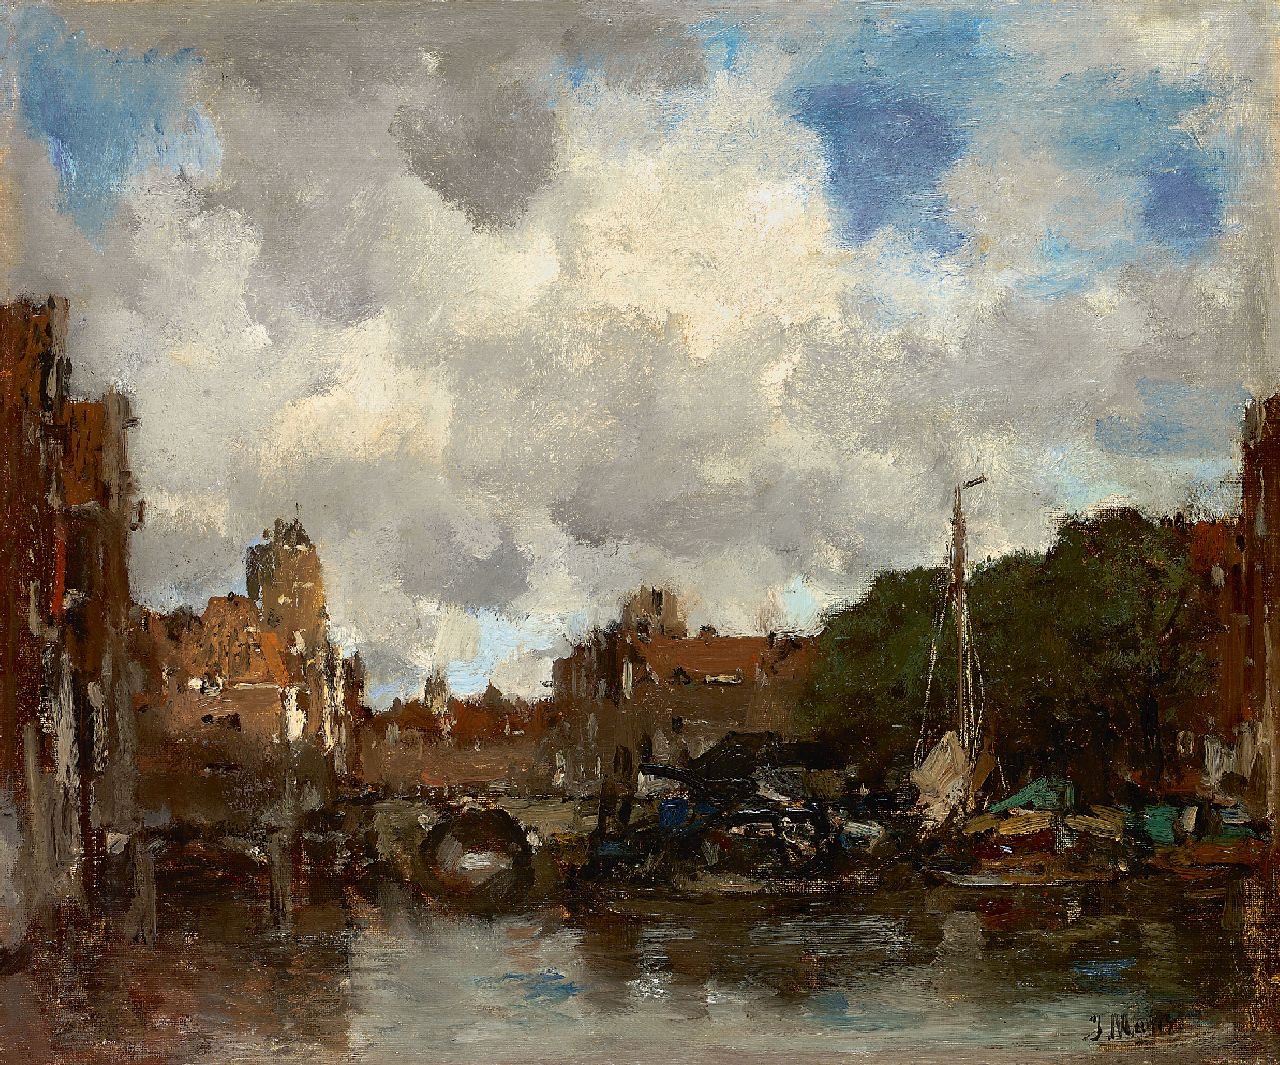 Maris J.H.  | Jacobus Hendricus 'Jacob' Maris | Paintings offered for sale | A Dutch harbour town (Dordrecht), oil on canvas 41.5 x 49.0 cm, signed l.r. and to be dated ca. 1890